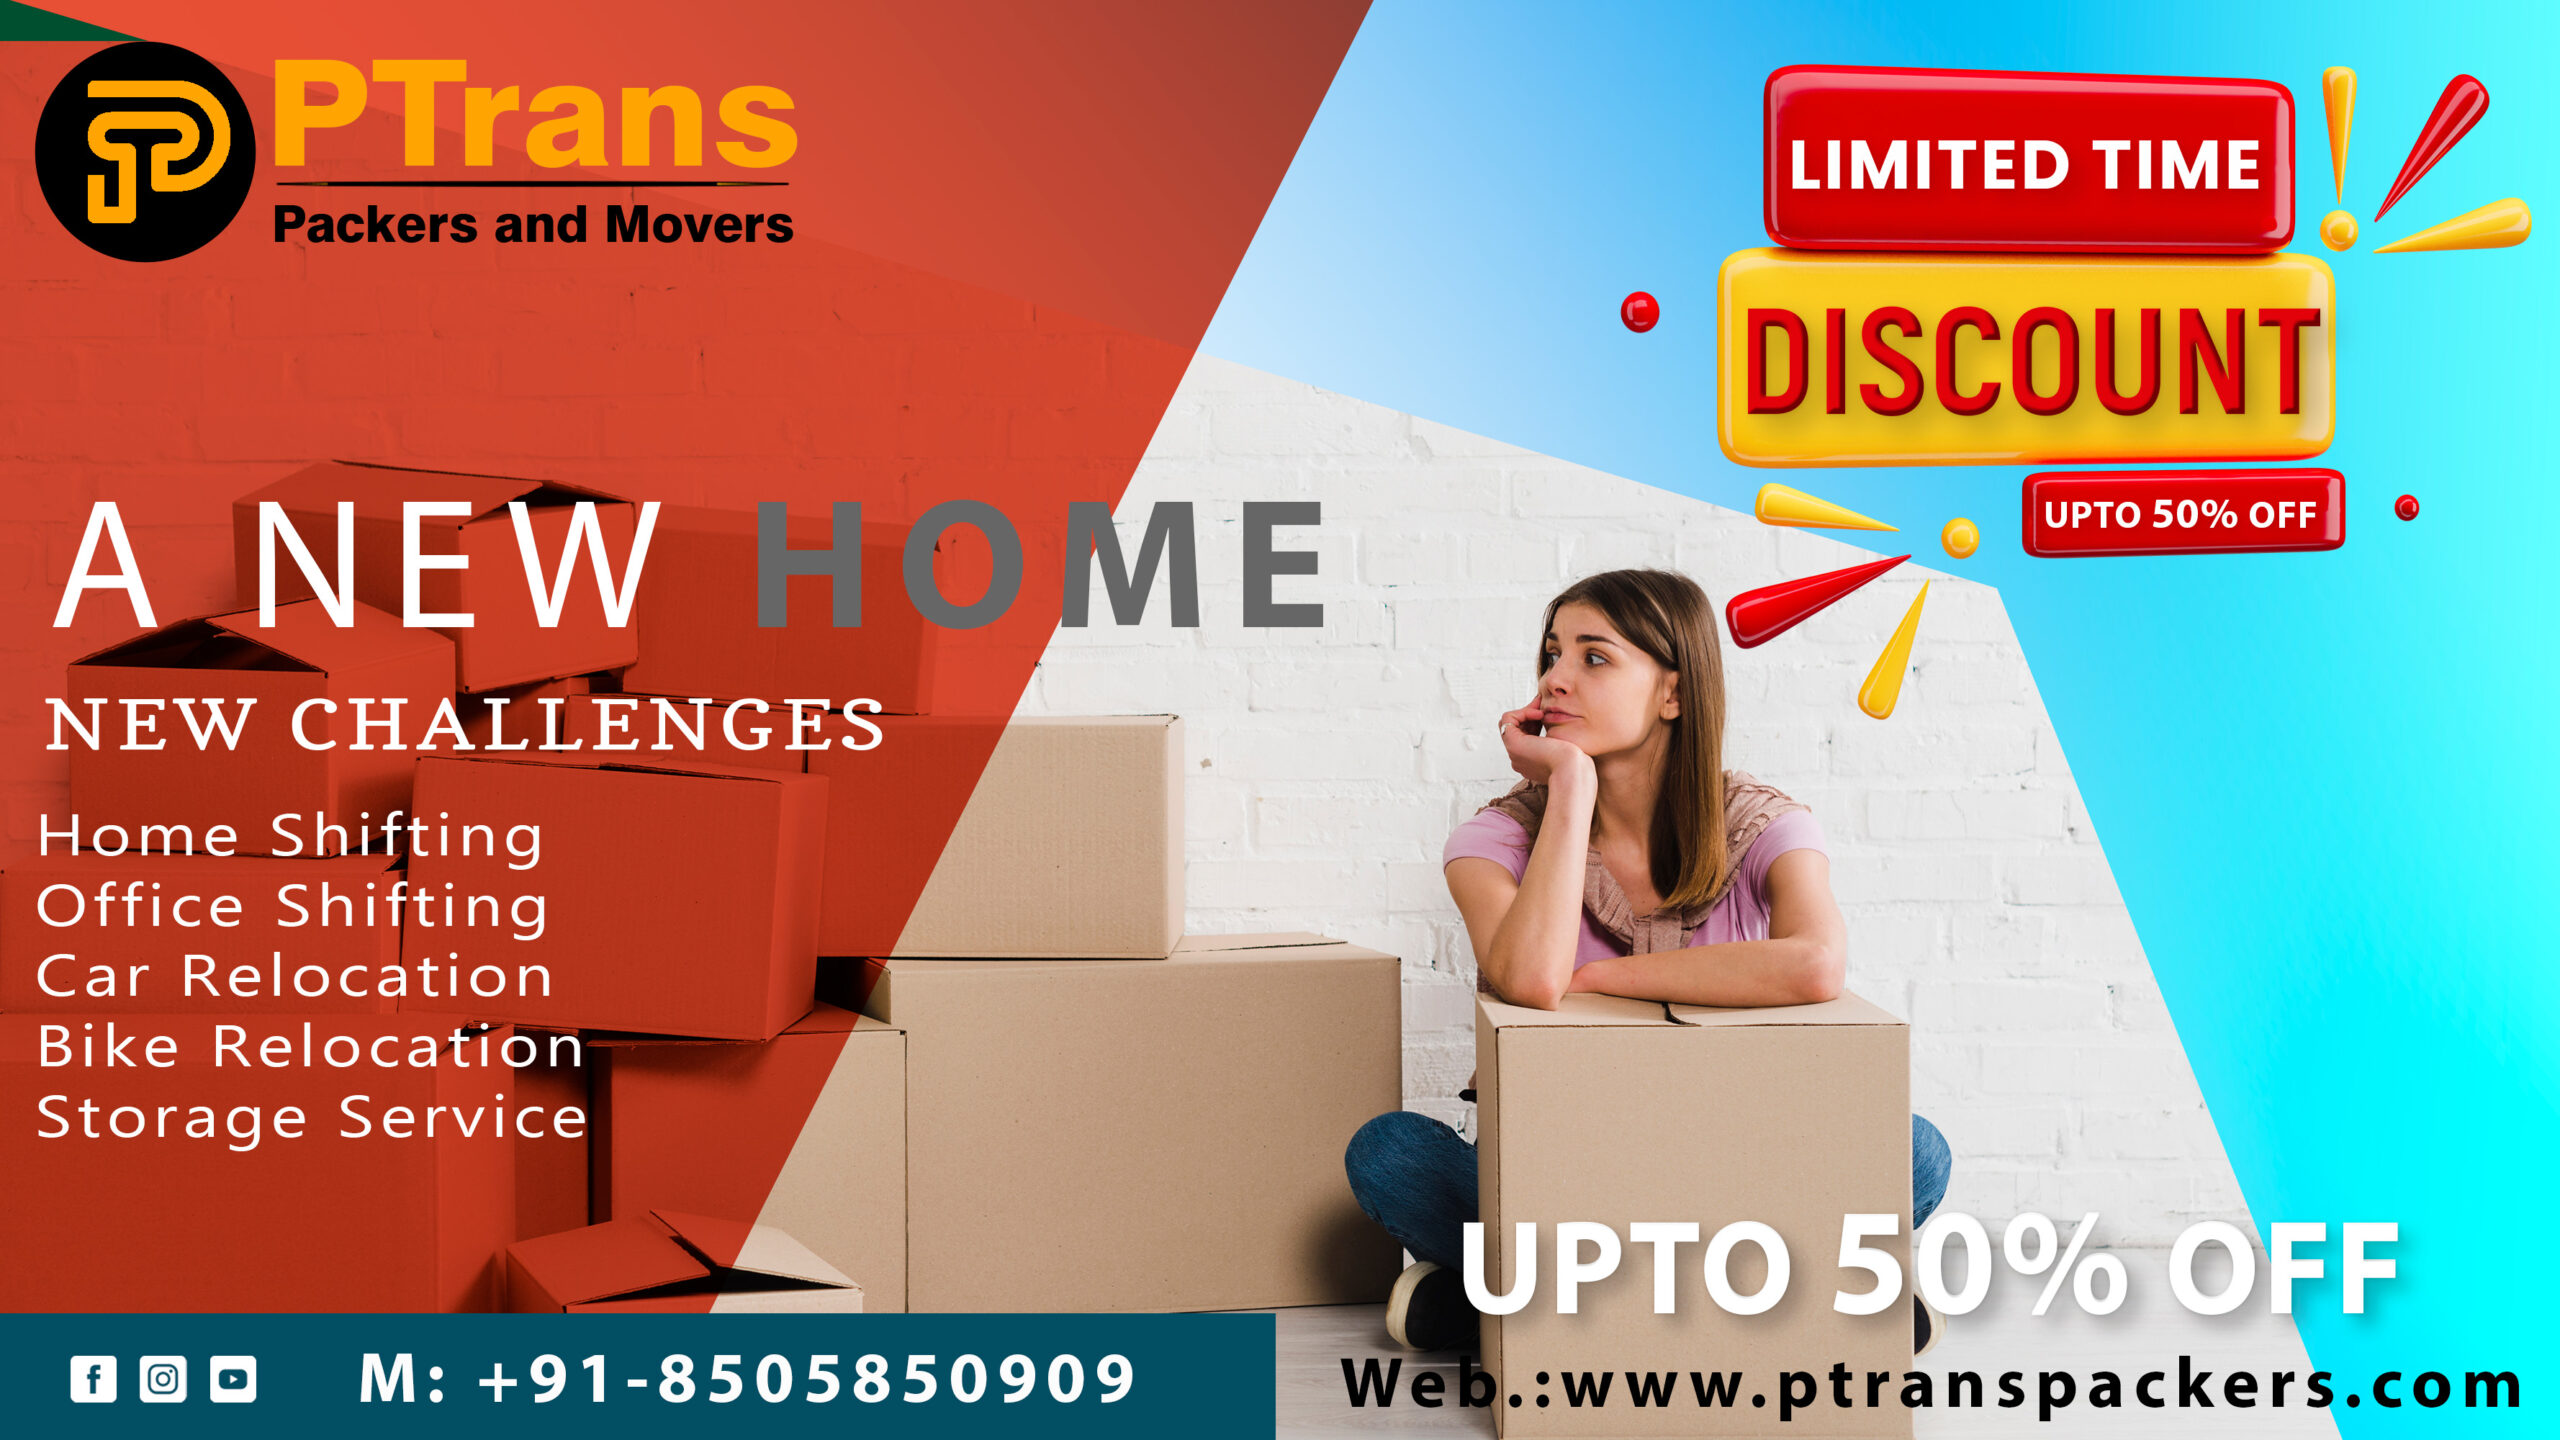 Packers and movers, movers and packers